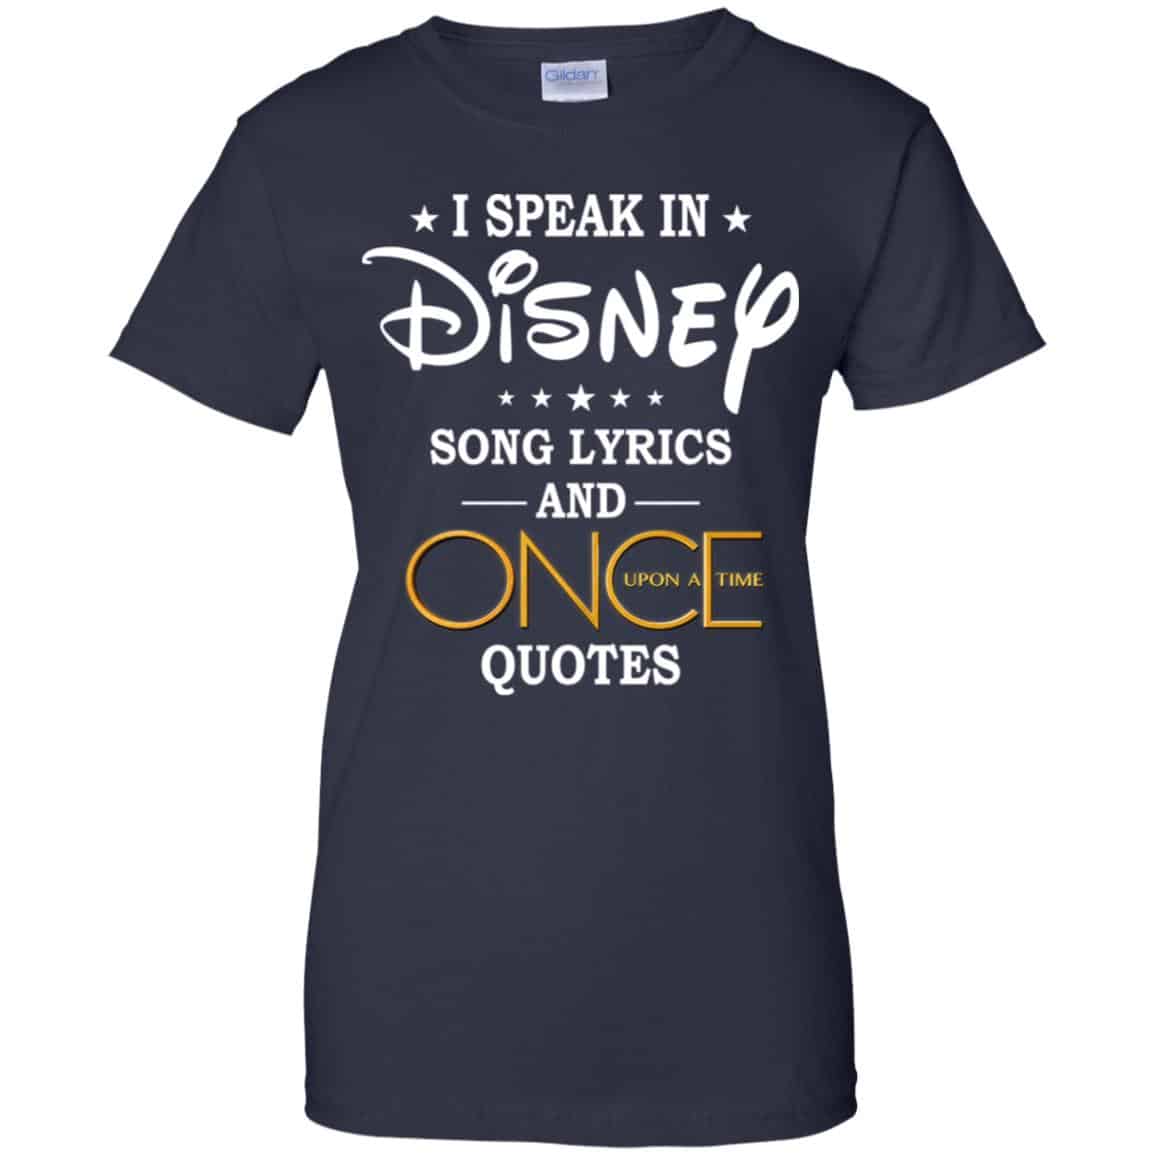 I Speak In Disney Song Lyrics And Once Upon A Time Quotes Shirt Hoodie Tank 0stees